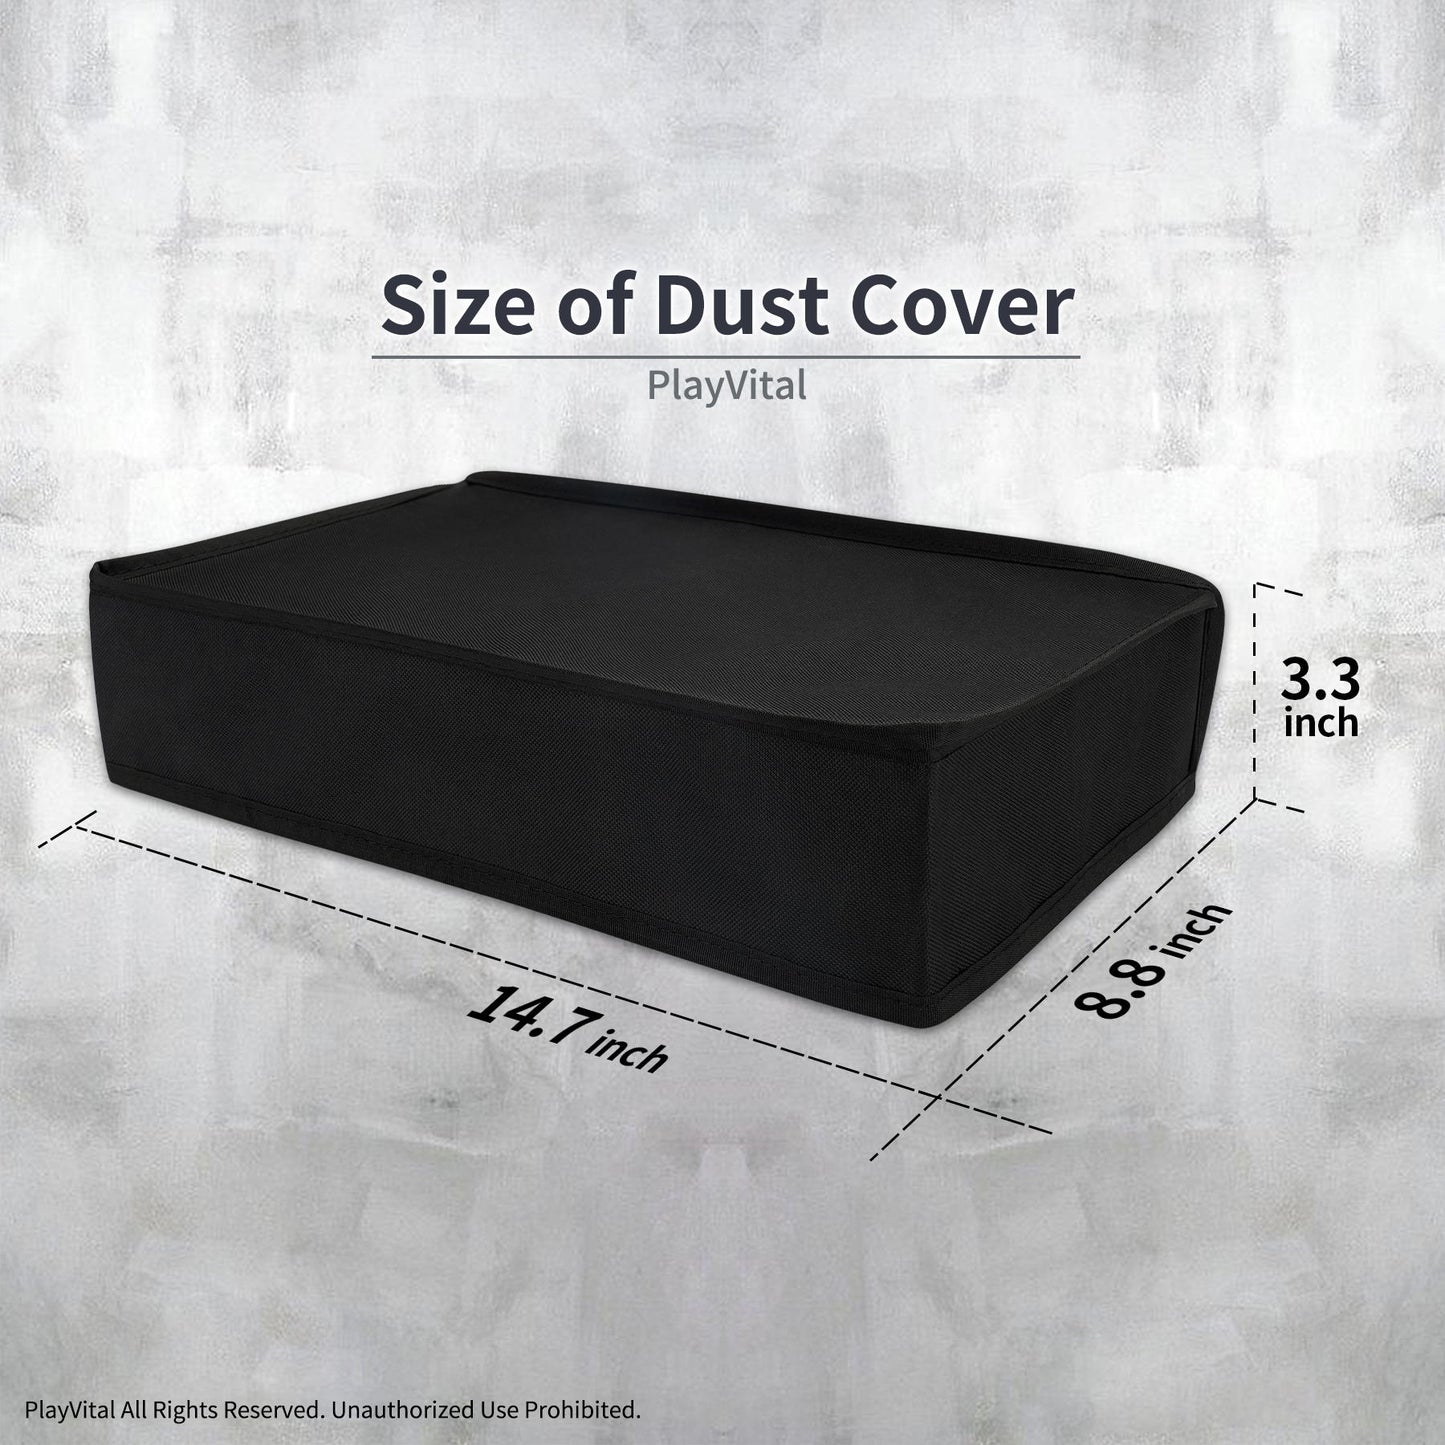 PlayVital Horizontal Dust Cover for ps5 Slim Digital Edition(The New Smaller Design), Black Dust Proof Protector Waterproof Cover Sleeve for ps5 Slim Console - RTKPFM001 PlayVital